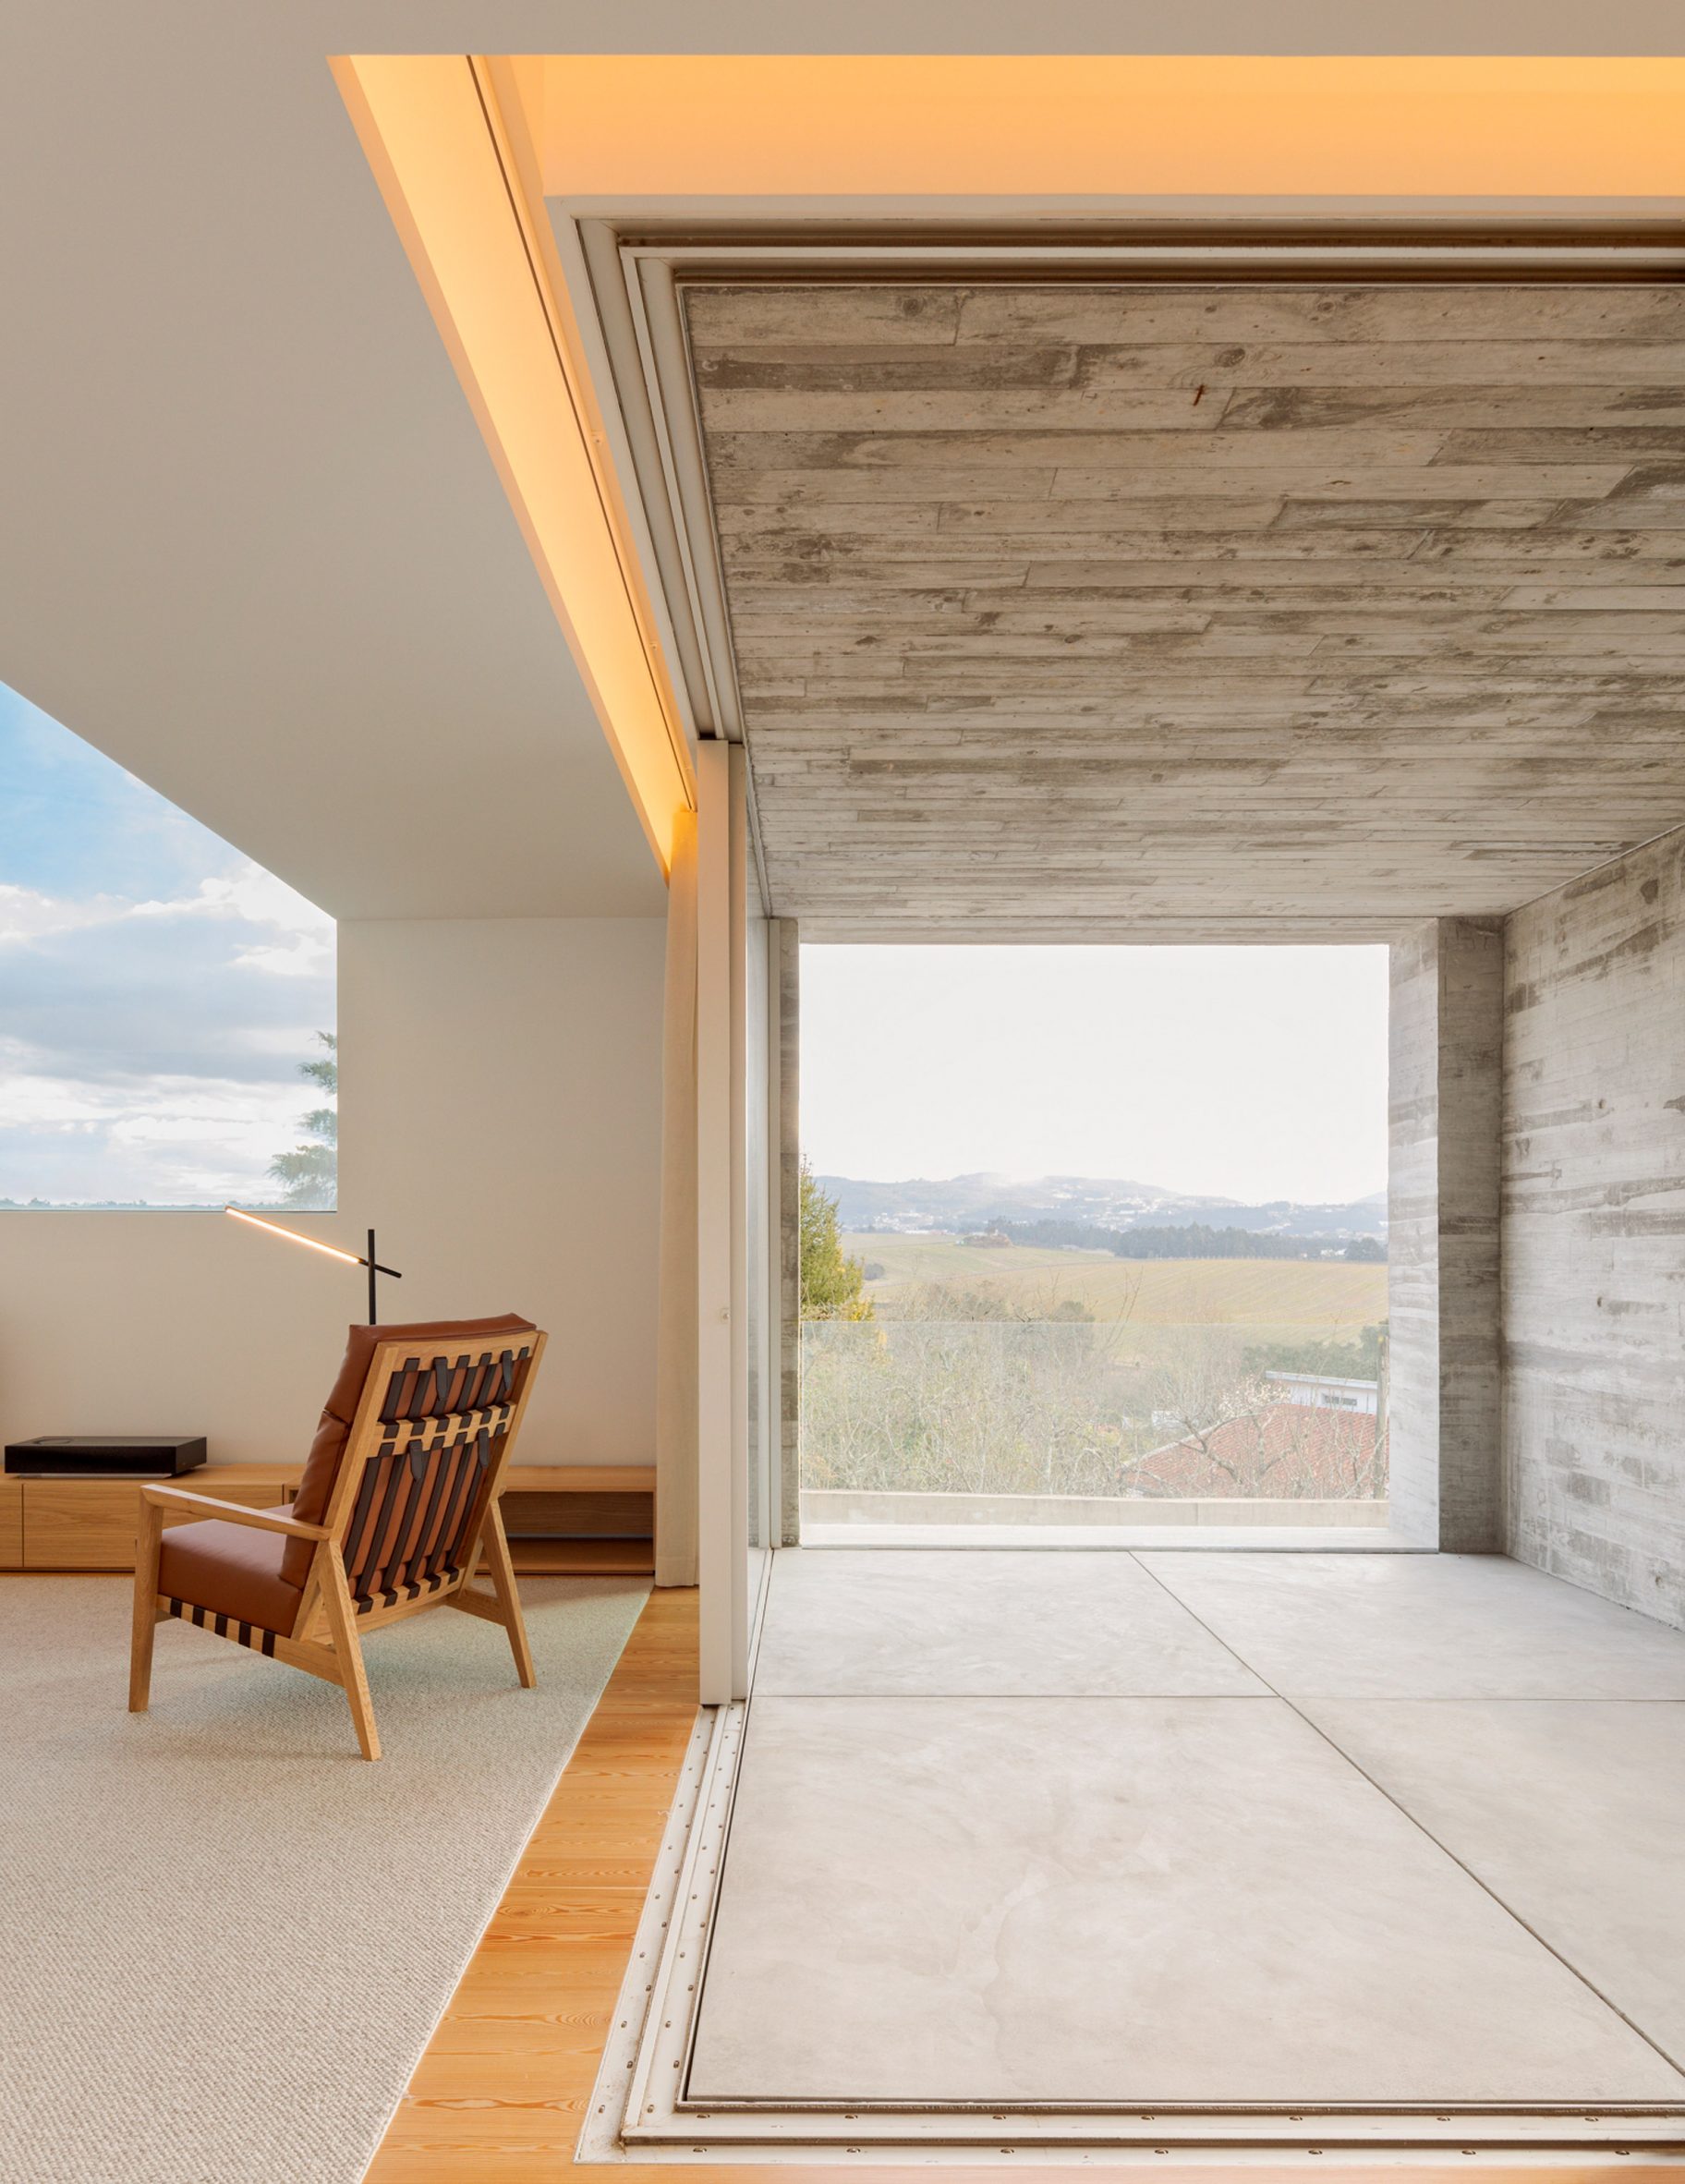 Interiors and deep reveal in SV House by Spaceworkers in Portugal